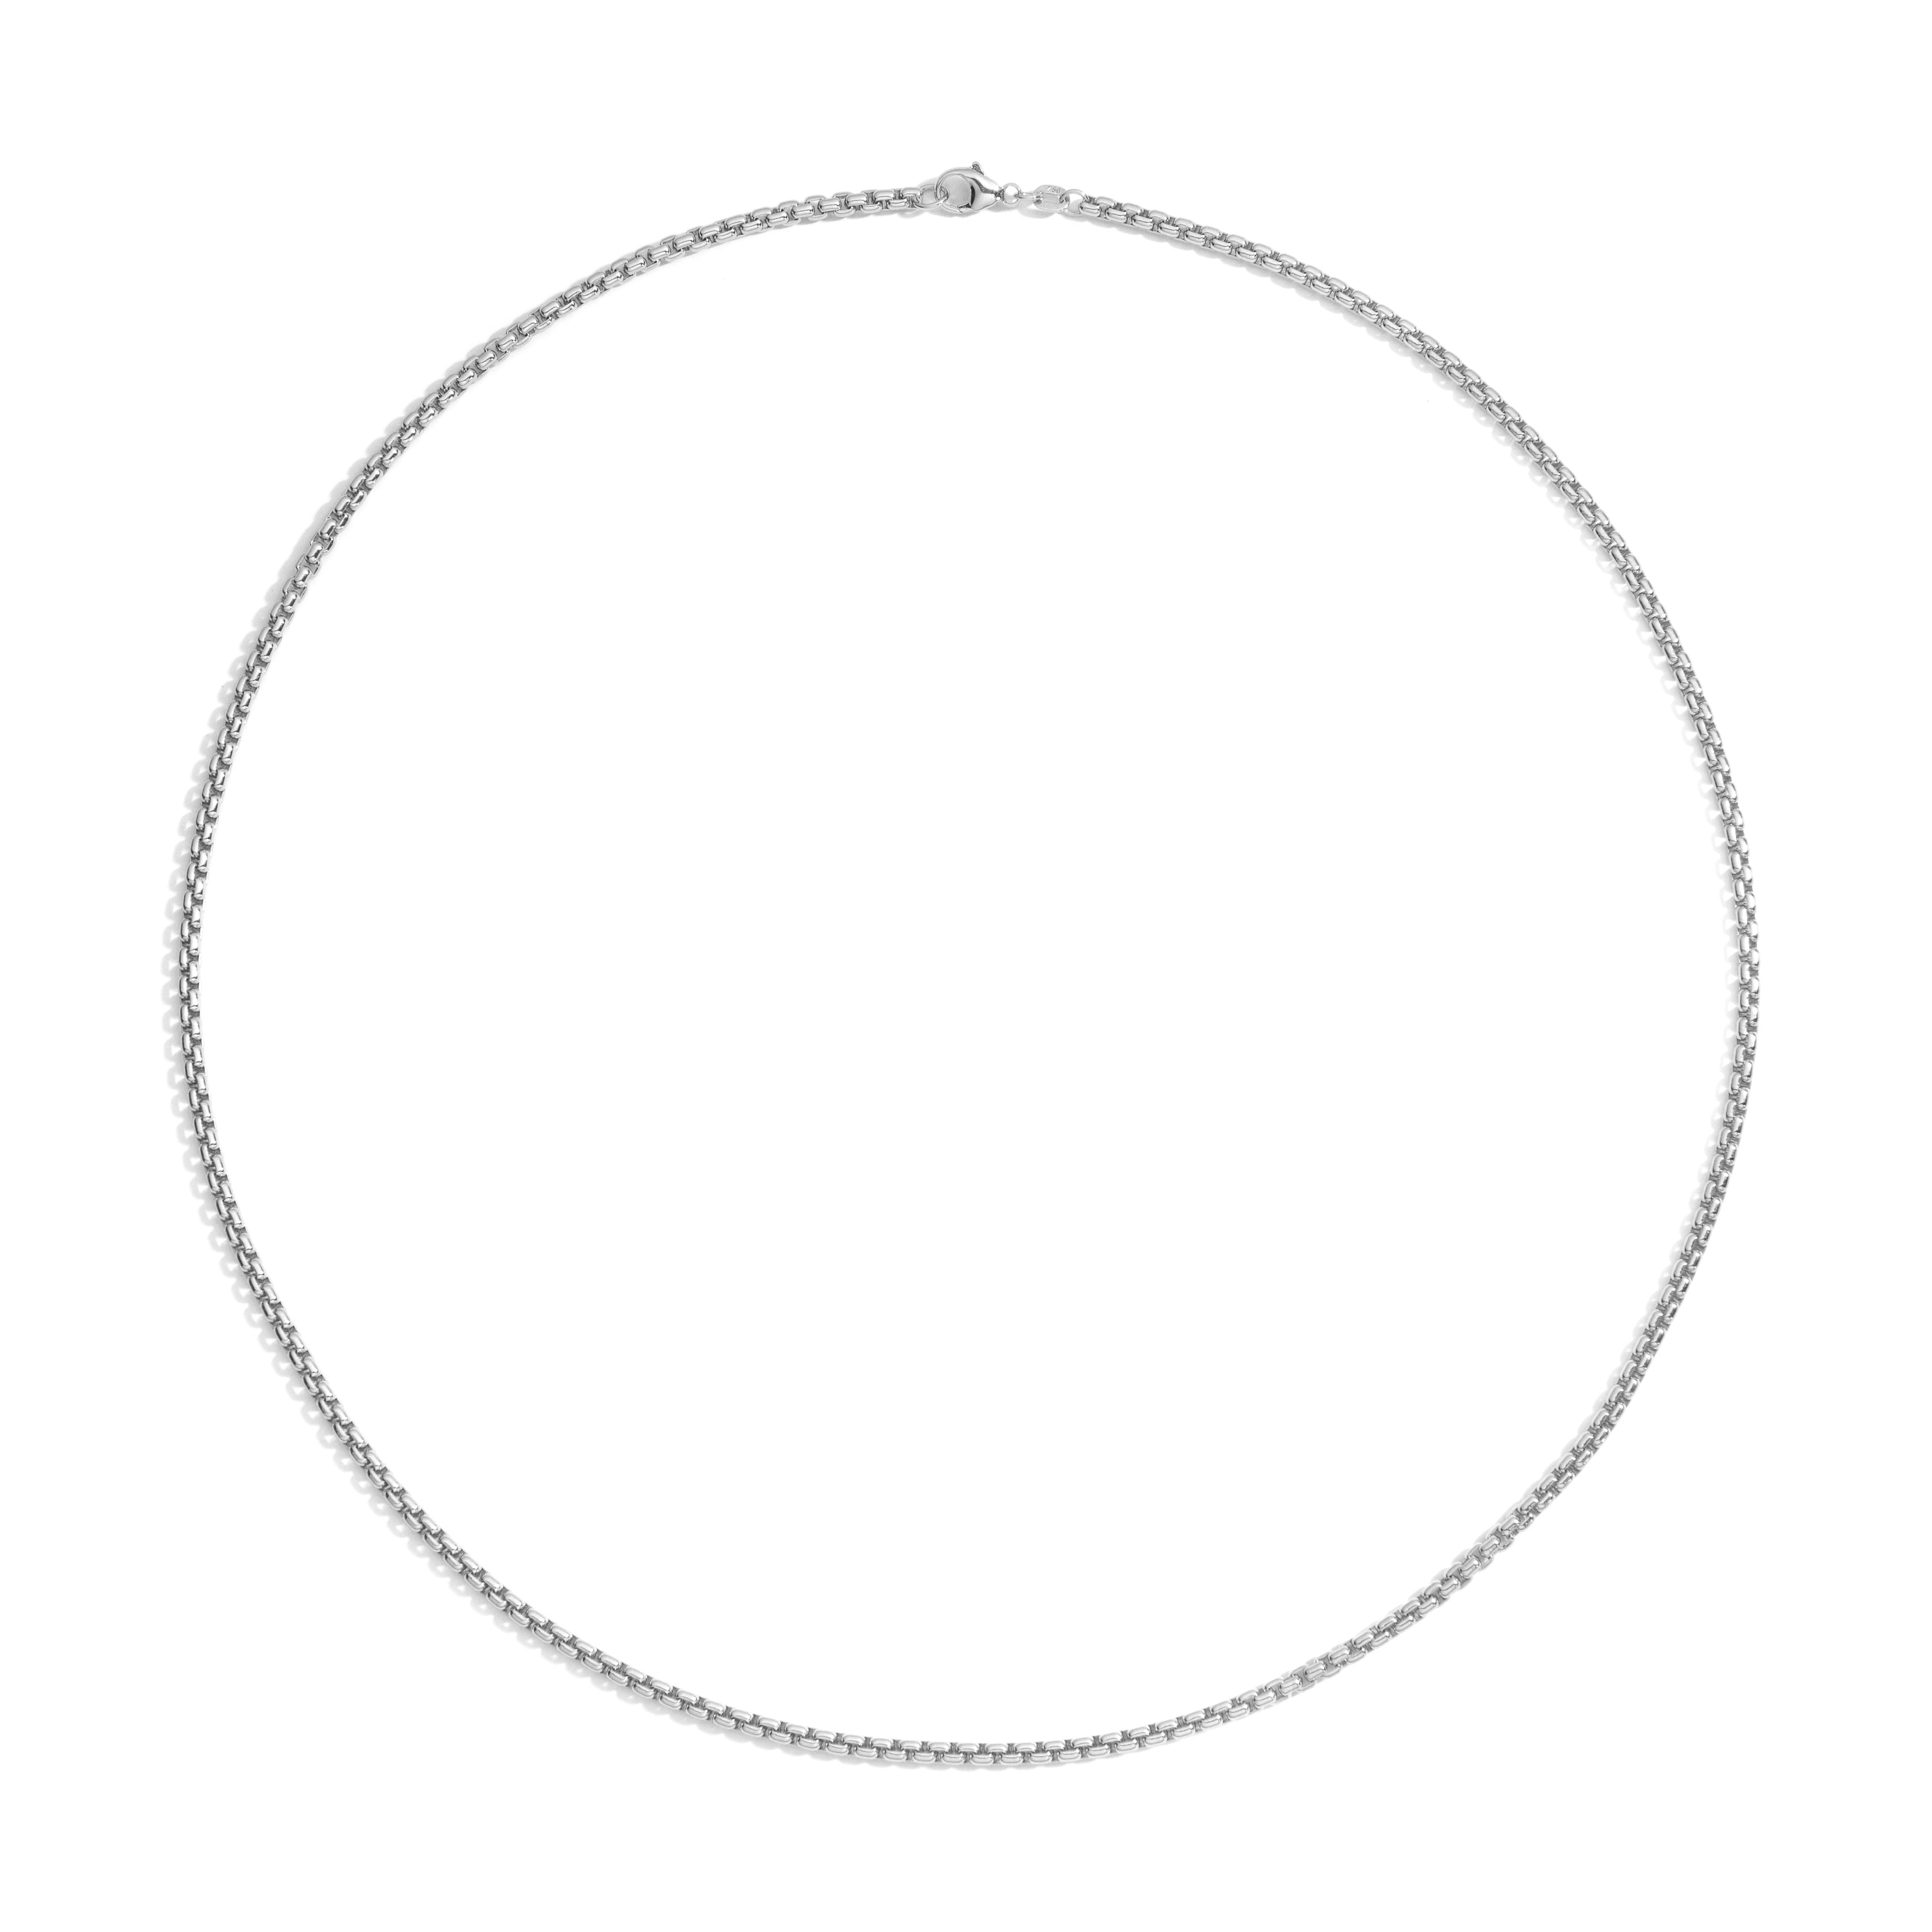 Shahla Karimi 2.7 mm Rounded Box Chain Necklace 14K White Gold